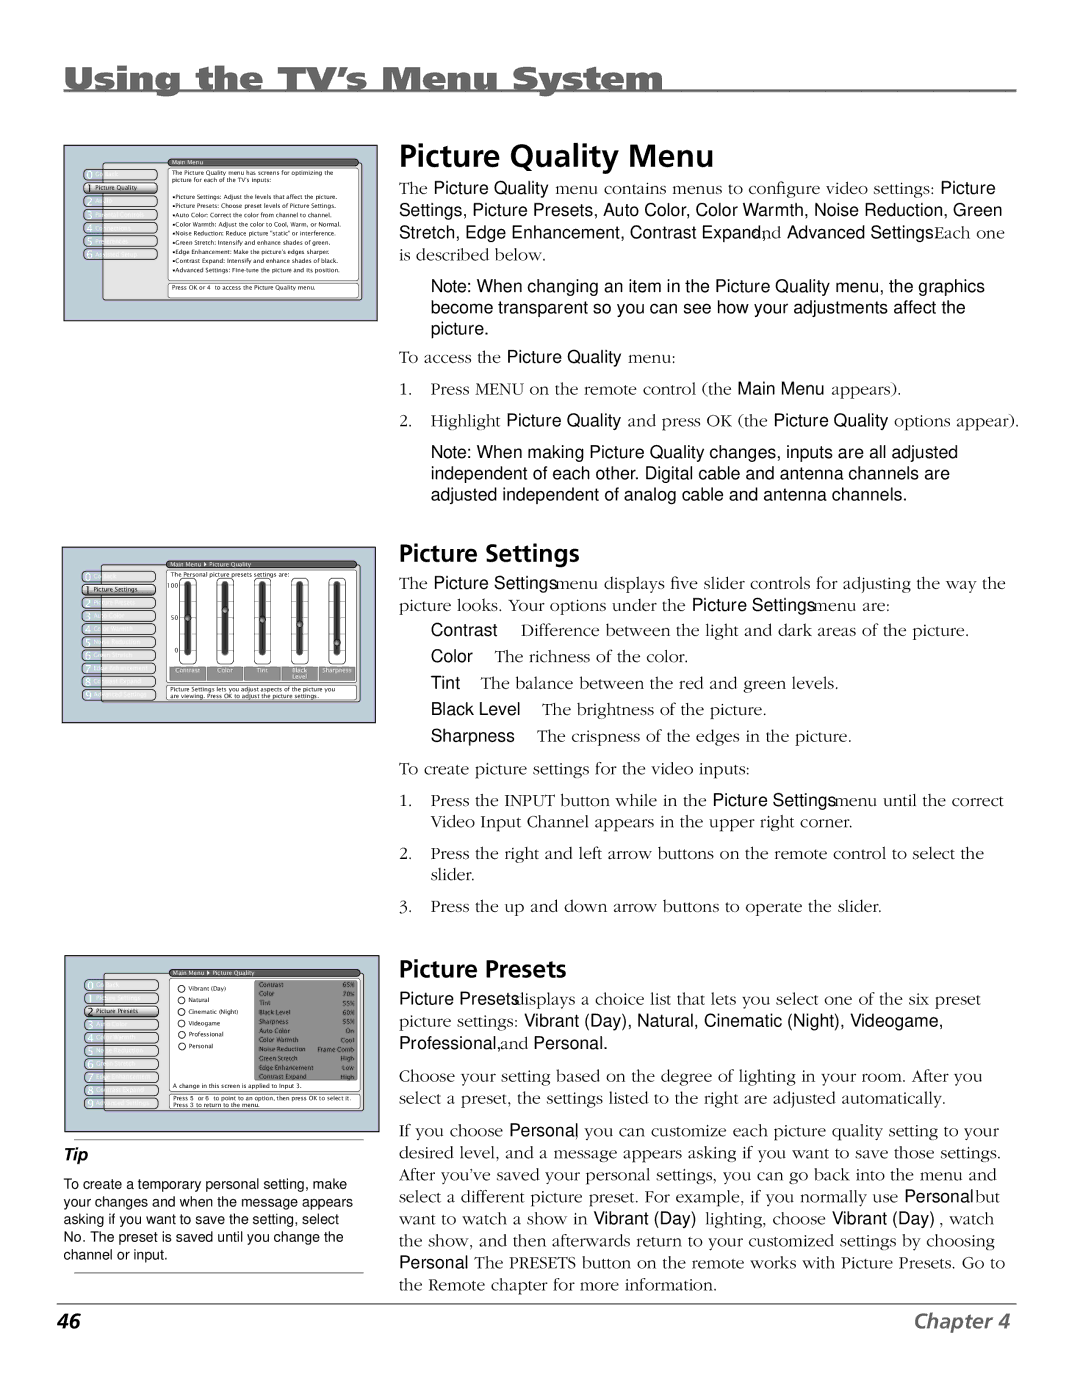 RCA HDTV manual Picture Quality Menu, Picture Settings, Picture Presets 